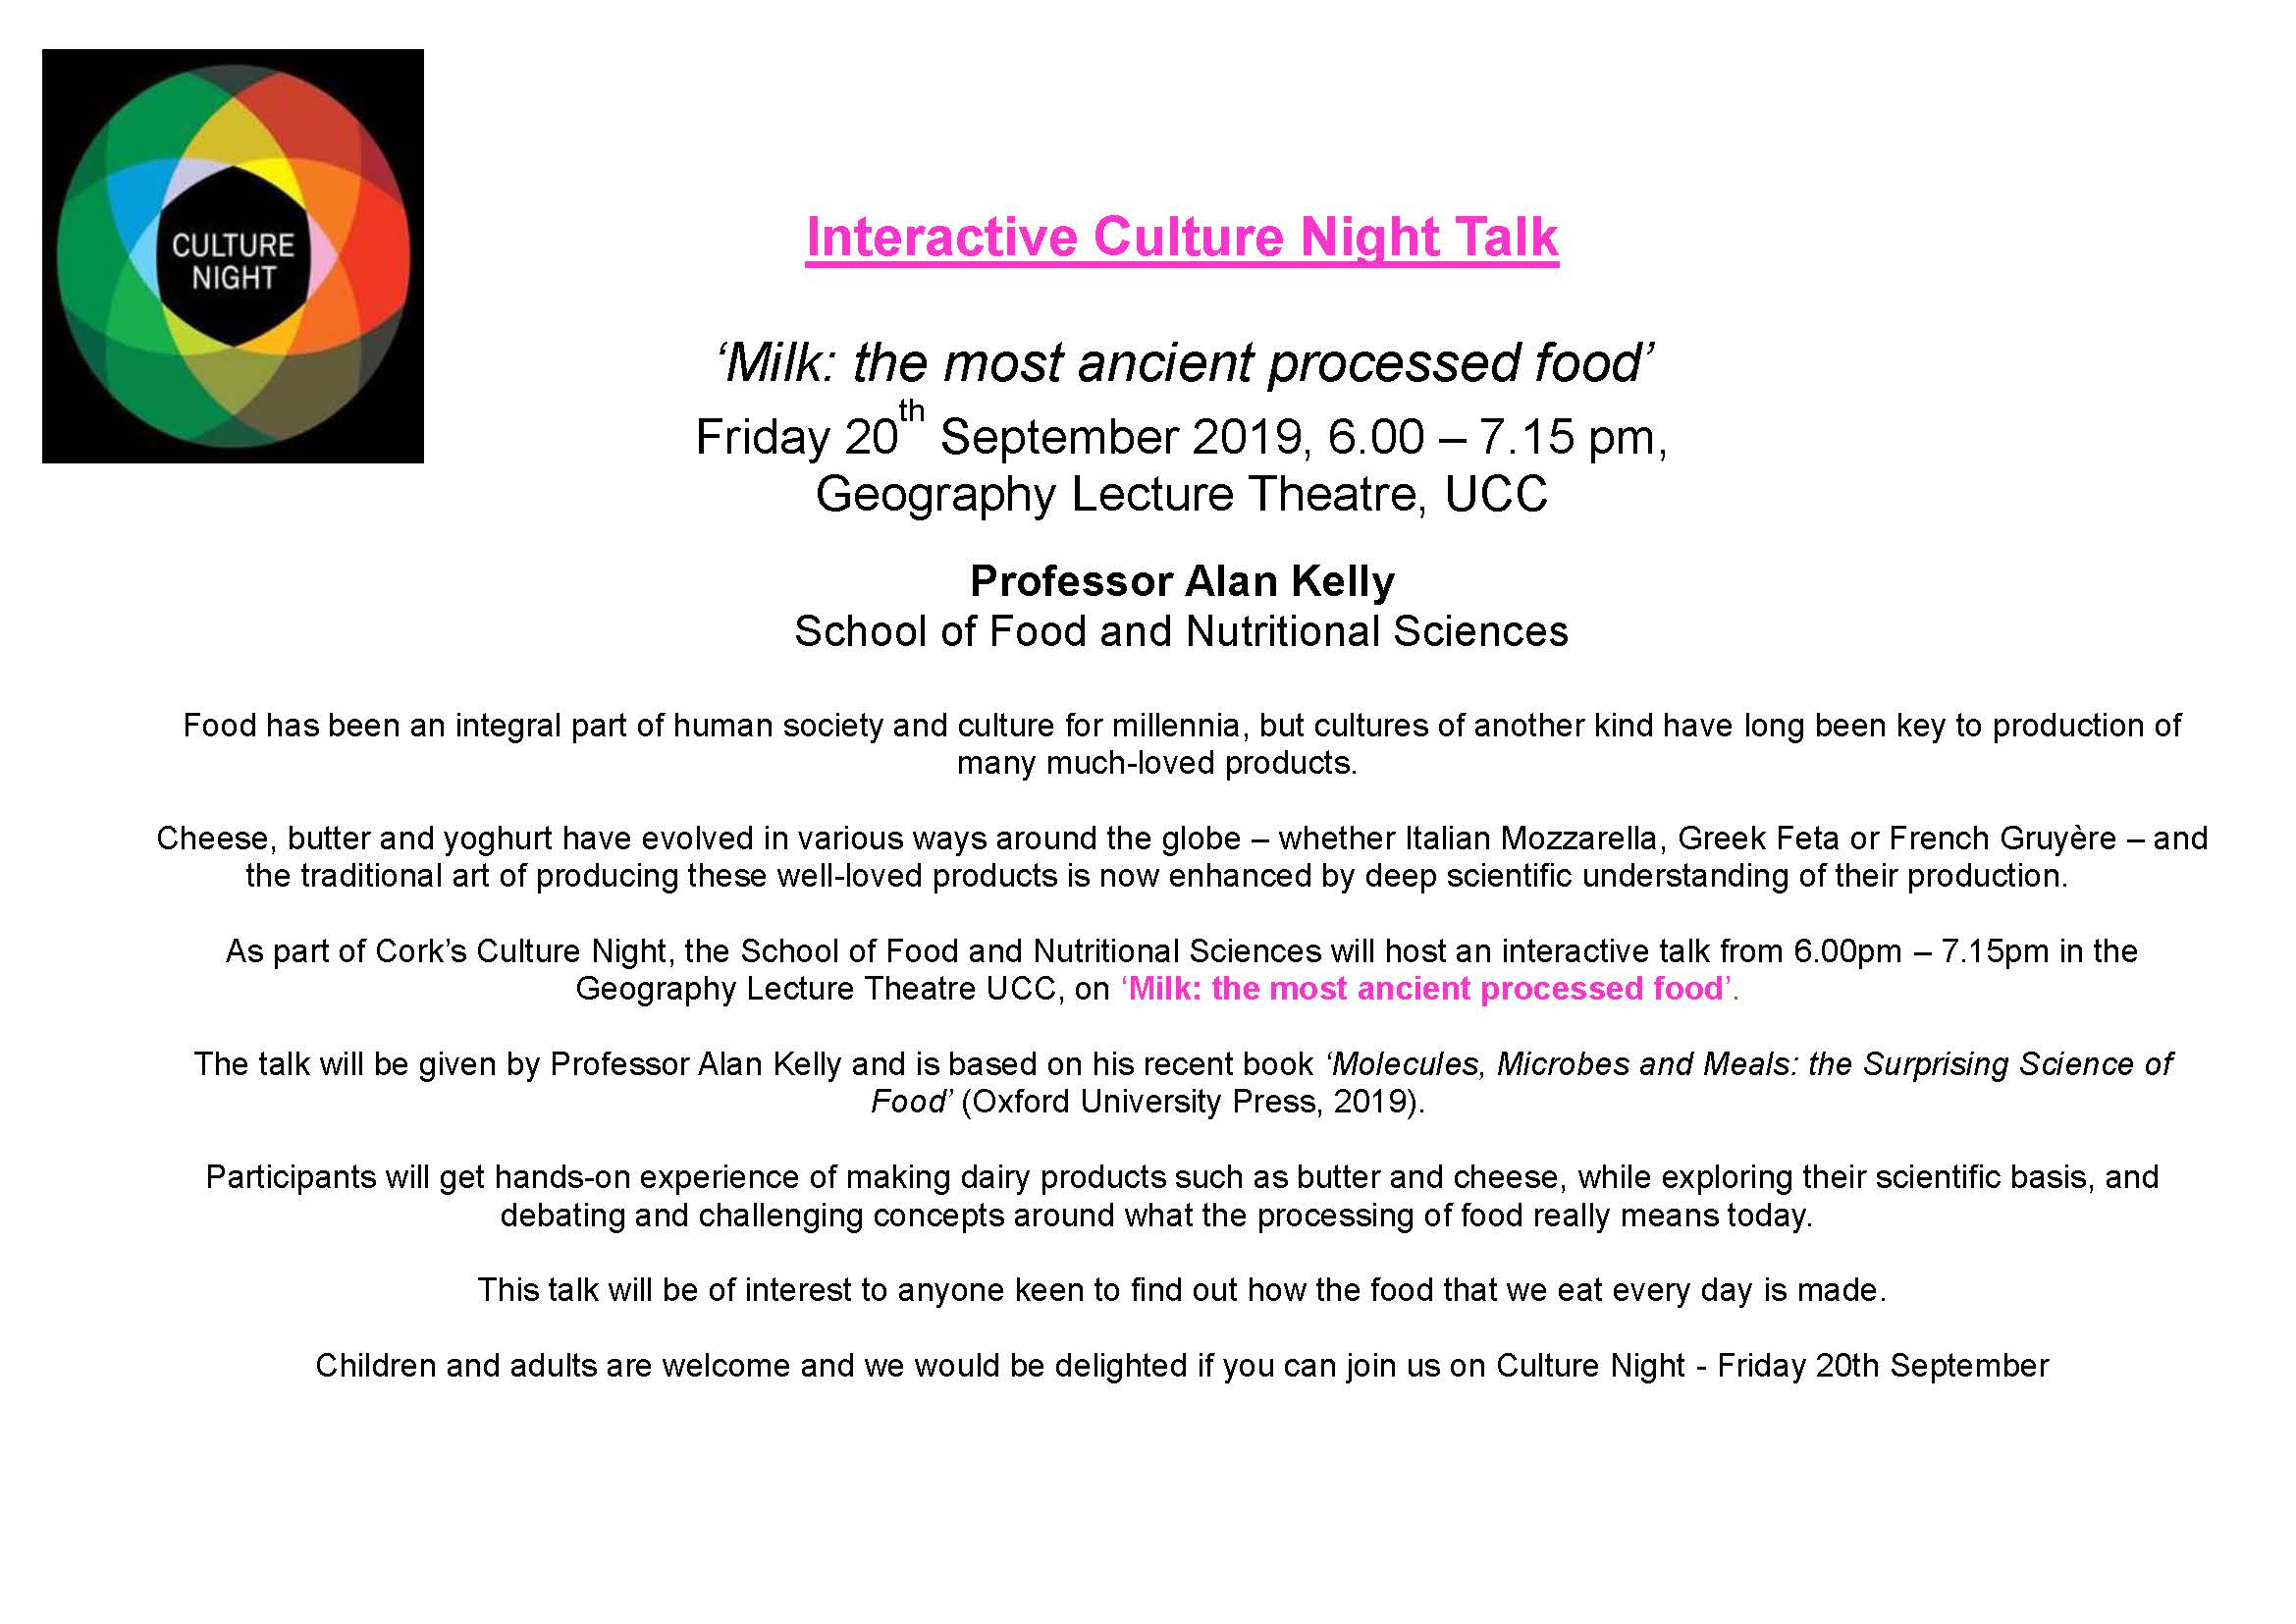 Culture Night September 19th 2019 - ‘Milk: the most ancient processed food’
